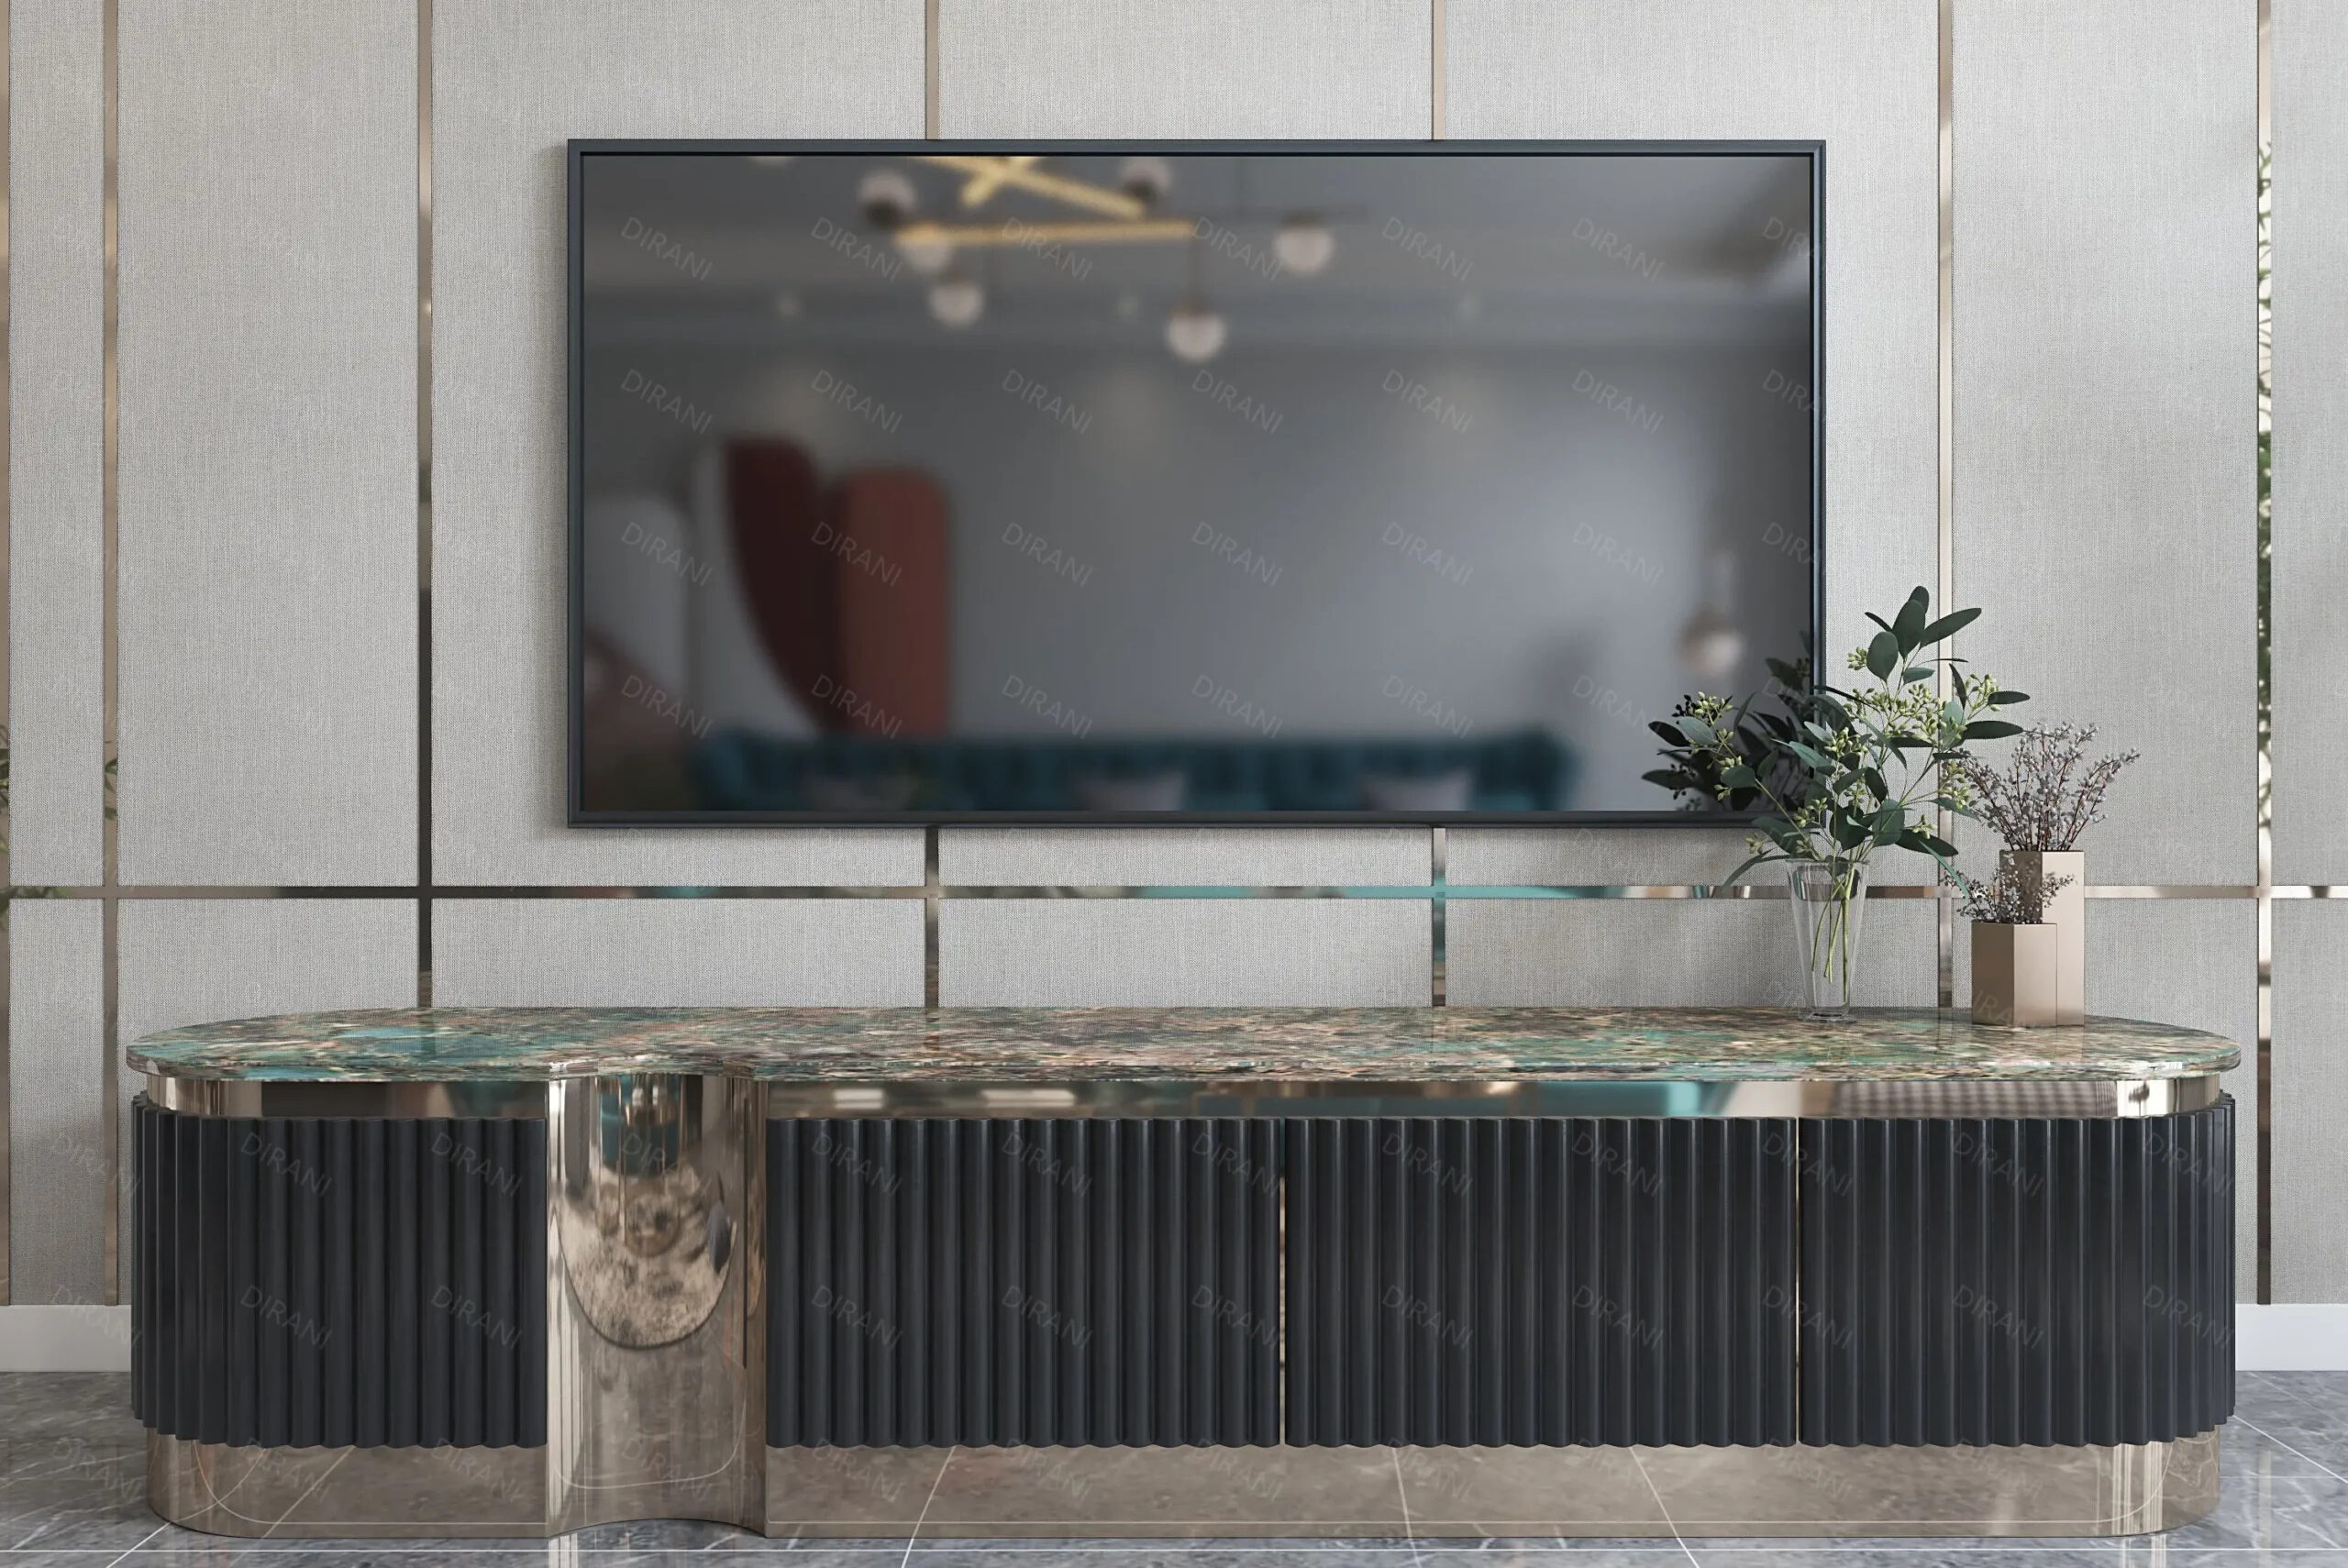 A sleek TV stand with a marble top, adding a touch of modernity to the room's decor.